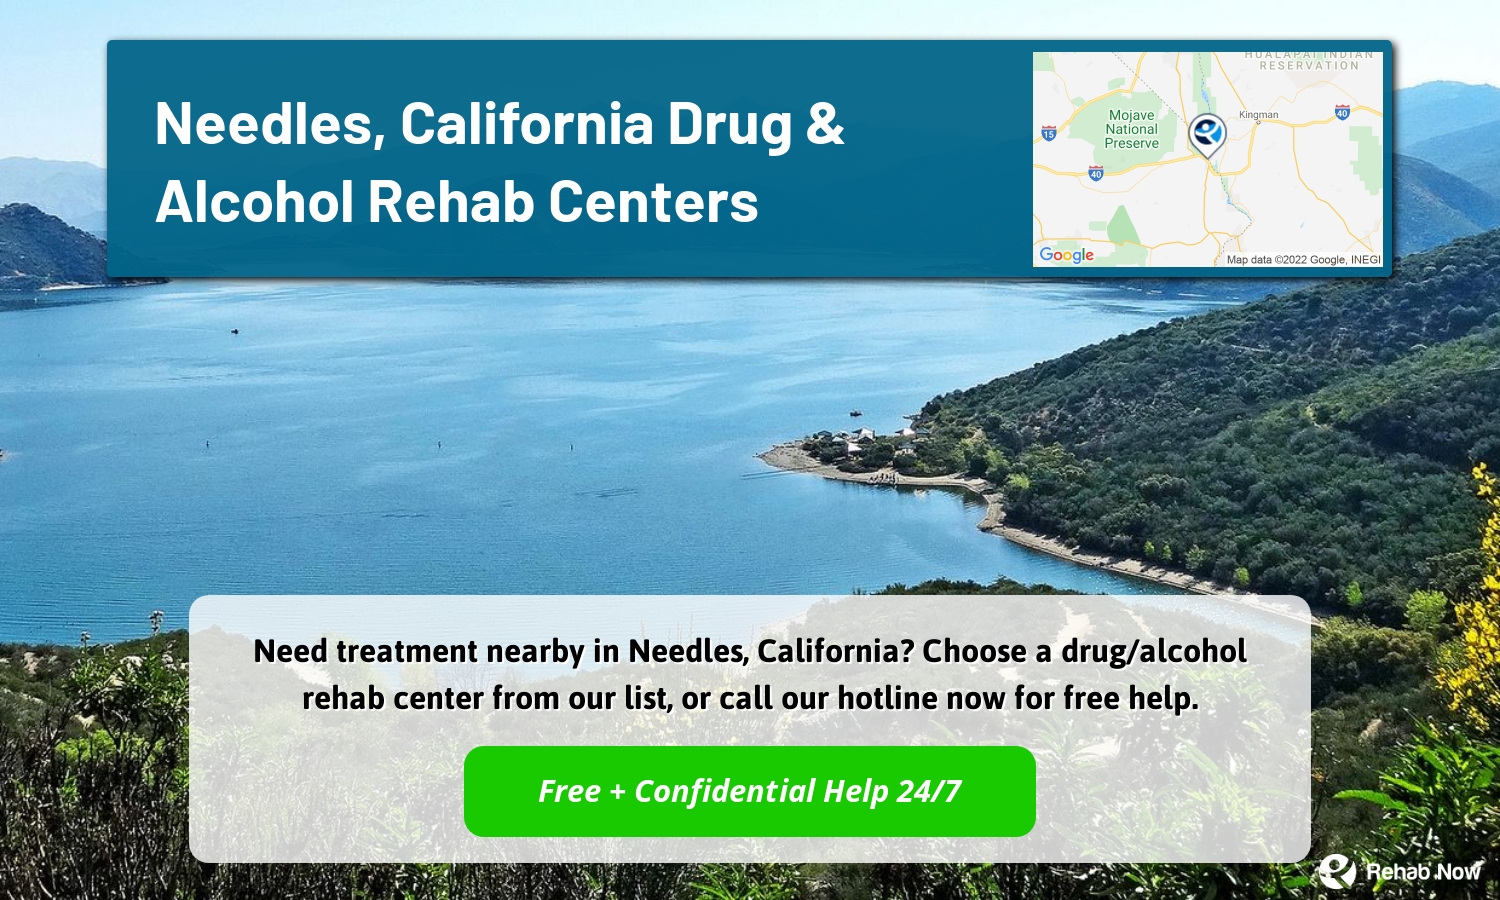 Need treatment nearby in Needles, California? Choose a drug/alcohol rehab center from our list, or call our hotline now for free help.